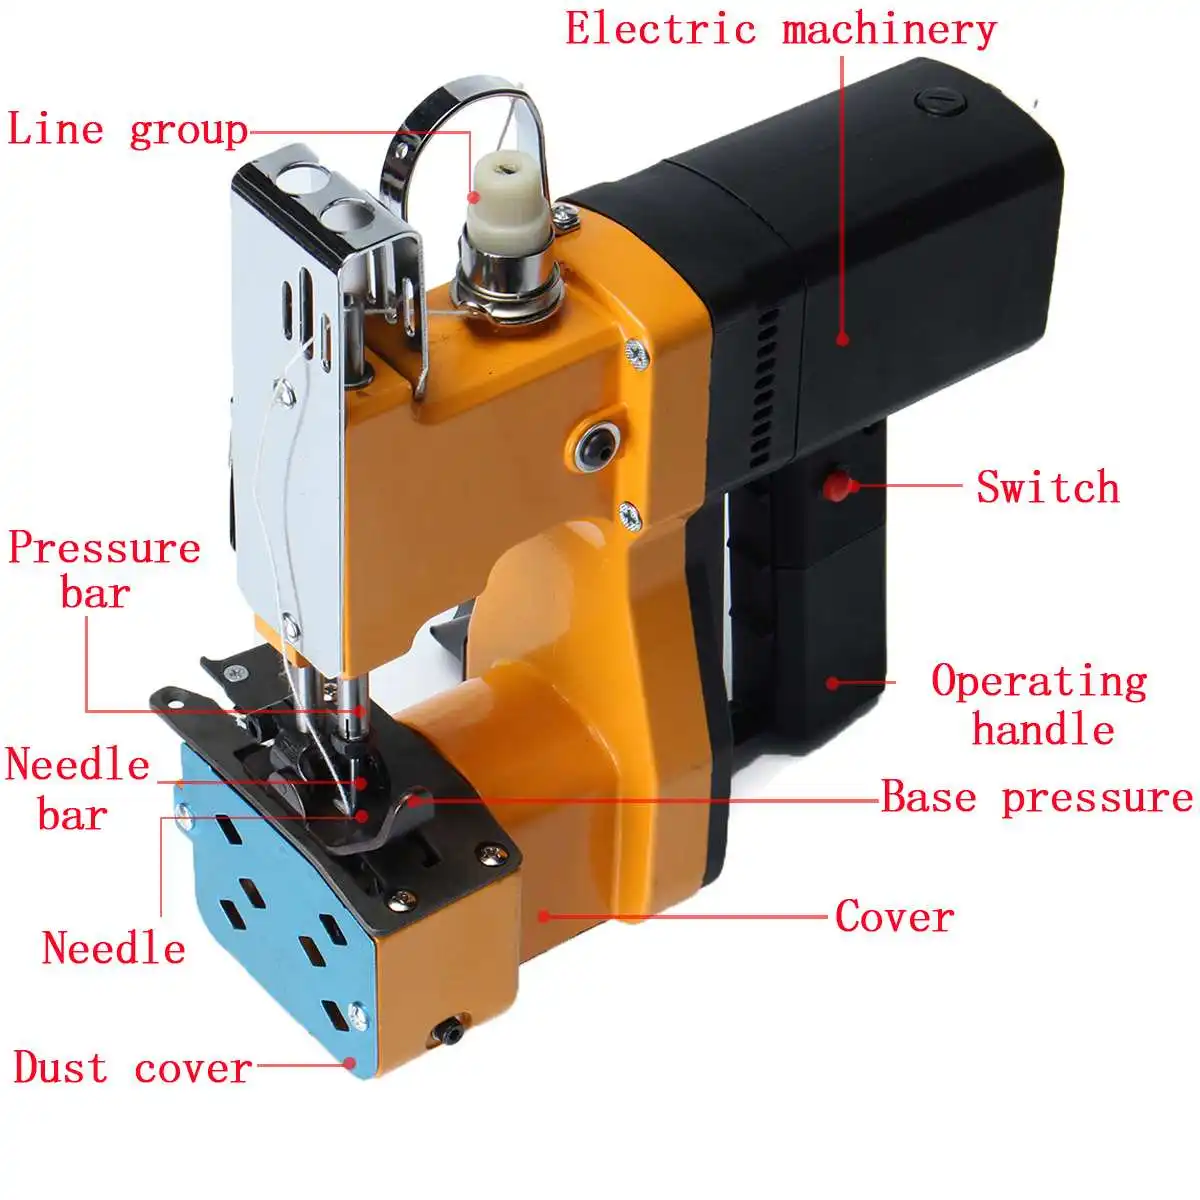 Others Portable Bag Closer Electric Sewing Machine Price in India - Buy  Others Portable Bag Closer Electric Sewing Machine online at Flipkart.com